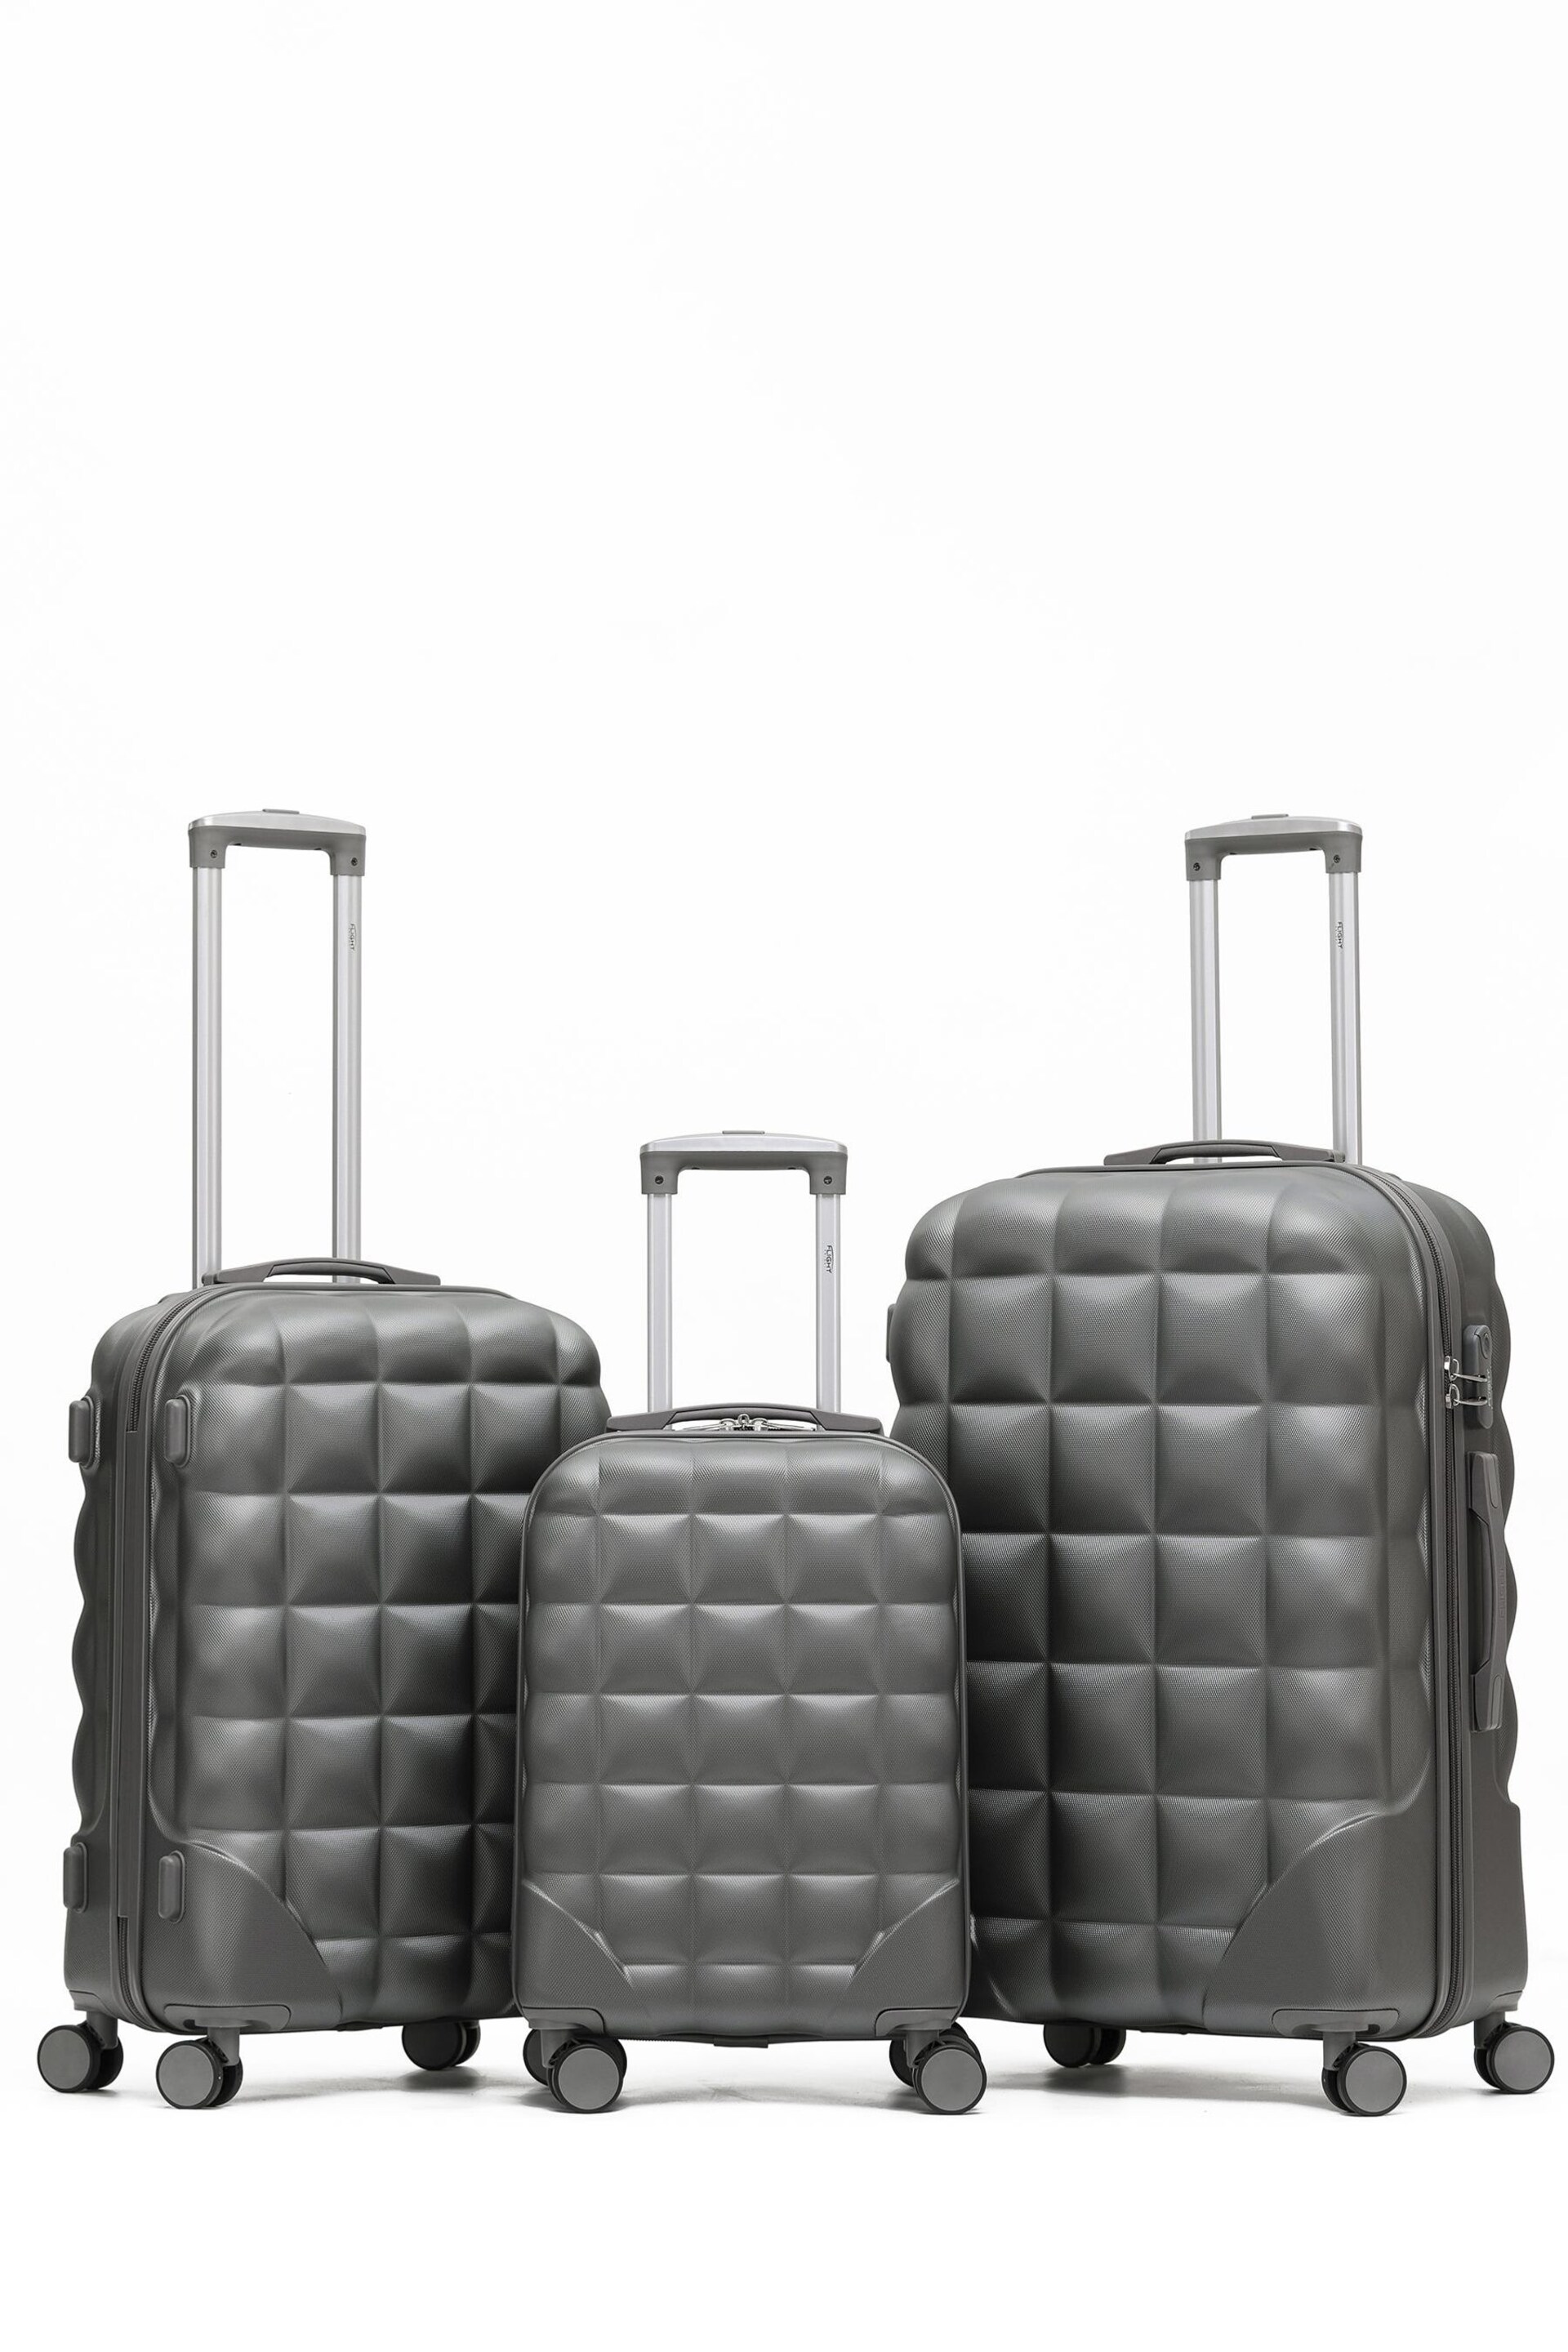 Flight Knight Hardcase Large Check in Suitcases and Cabin Case Black/Silver Set of 3 - Image 1 of 7